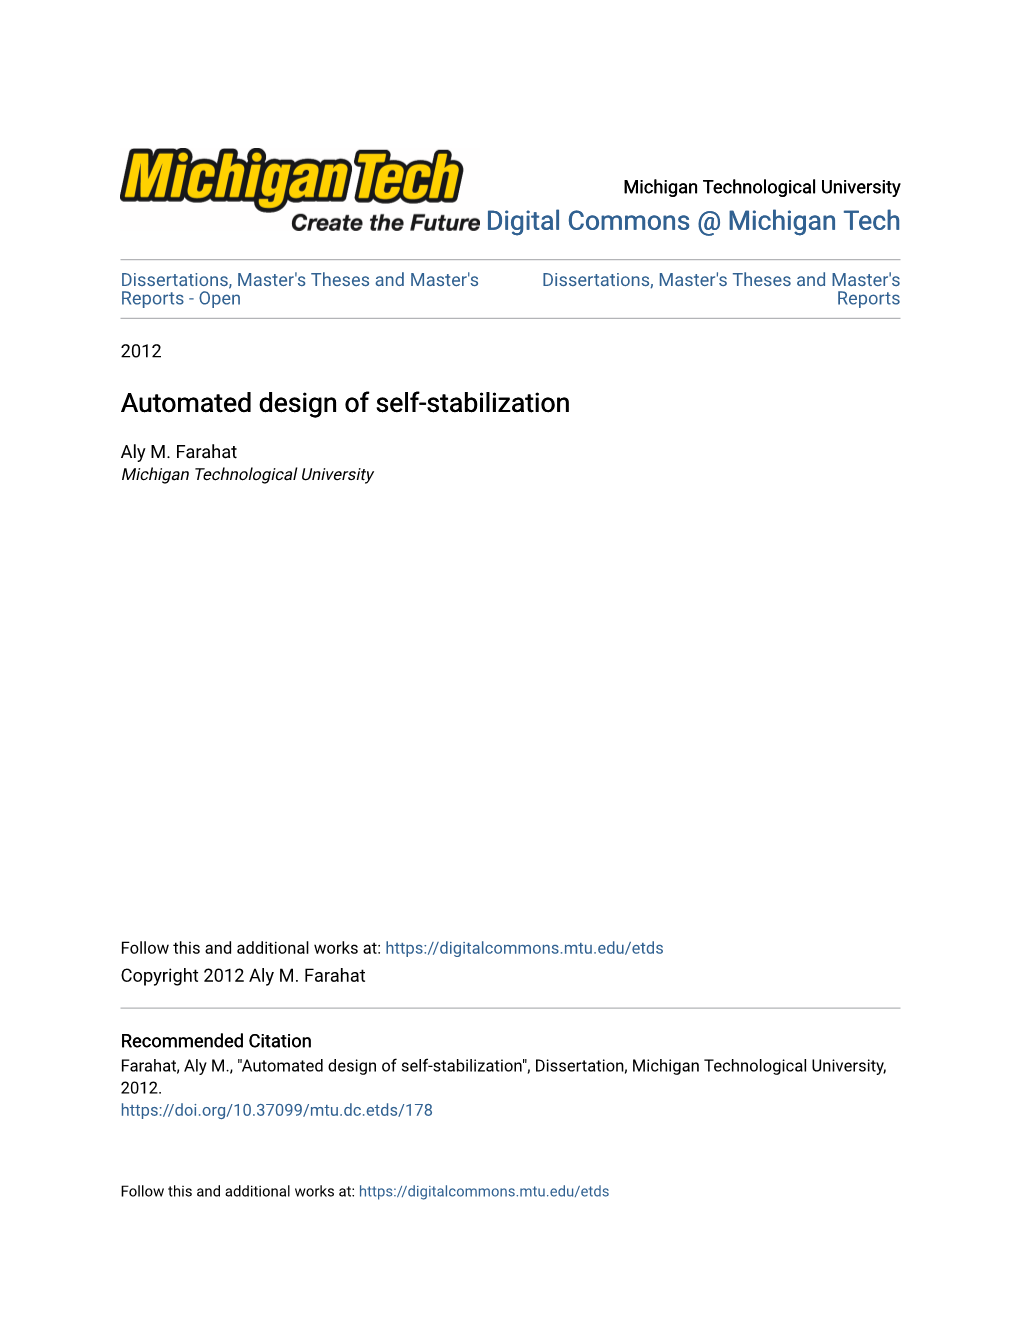 Automated Design of Self-Stabilization